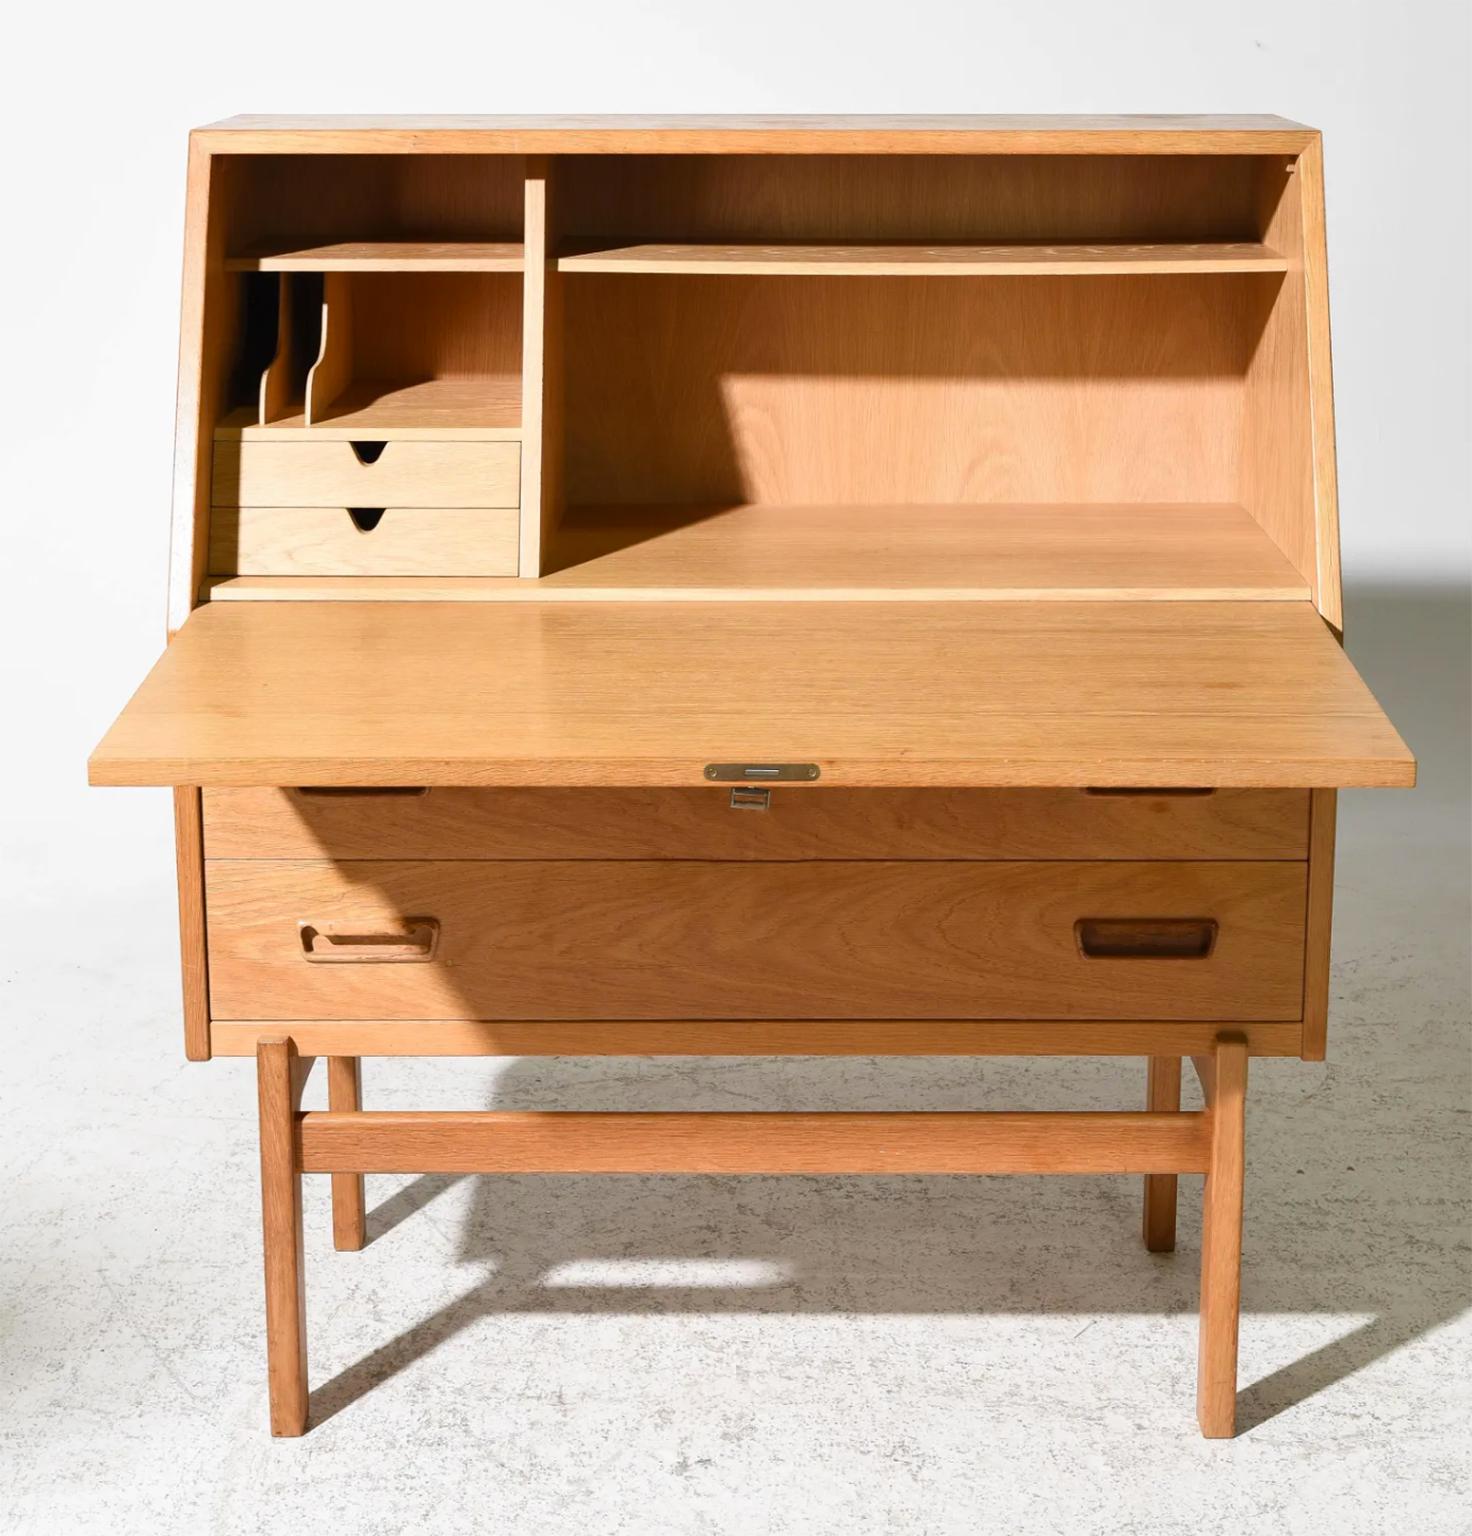 midcentury Arne Wahl Iversen for Vinde Mobelfabrik in light teak desk Model No. 68. Featuring a flip down front with 2 drawers and organizer slots. Beautiful all wood construction including brass hinges with wonderful patina. teak grain is stunning.